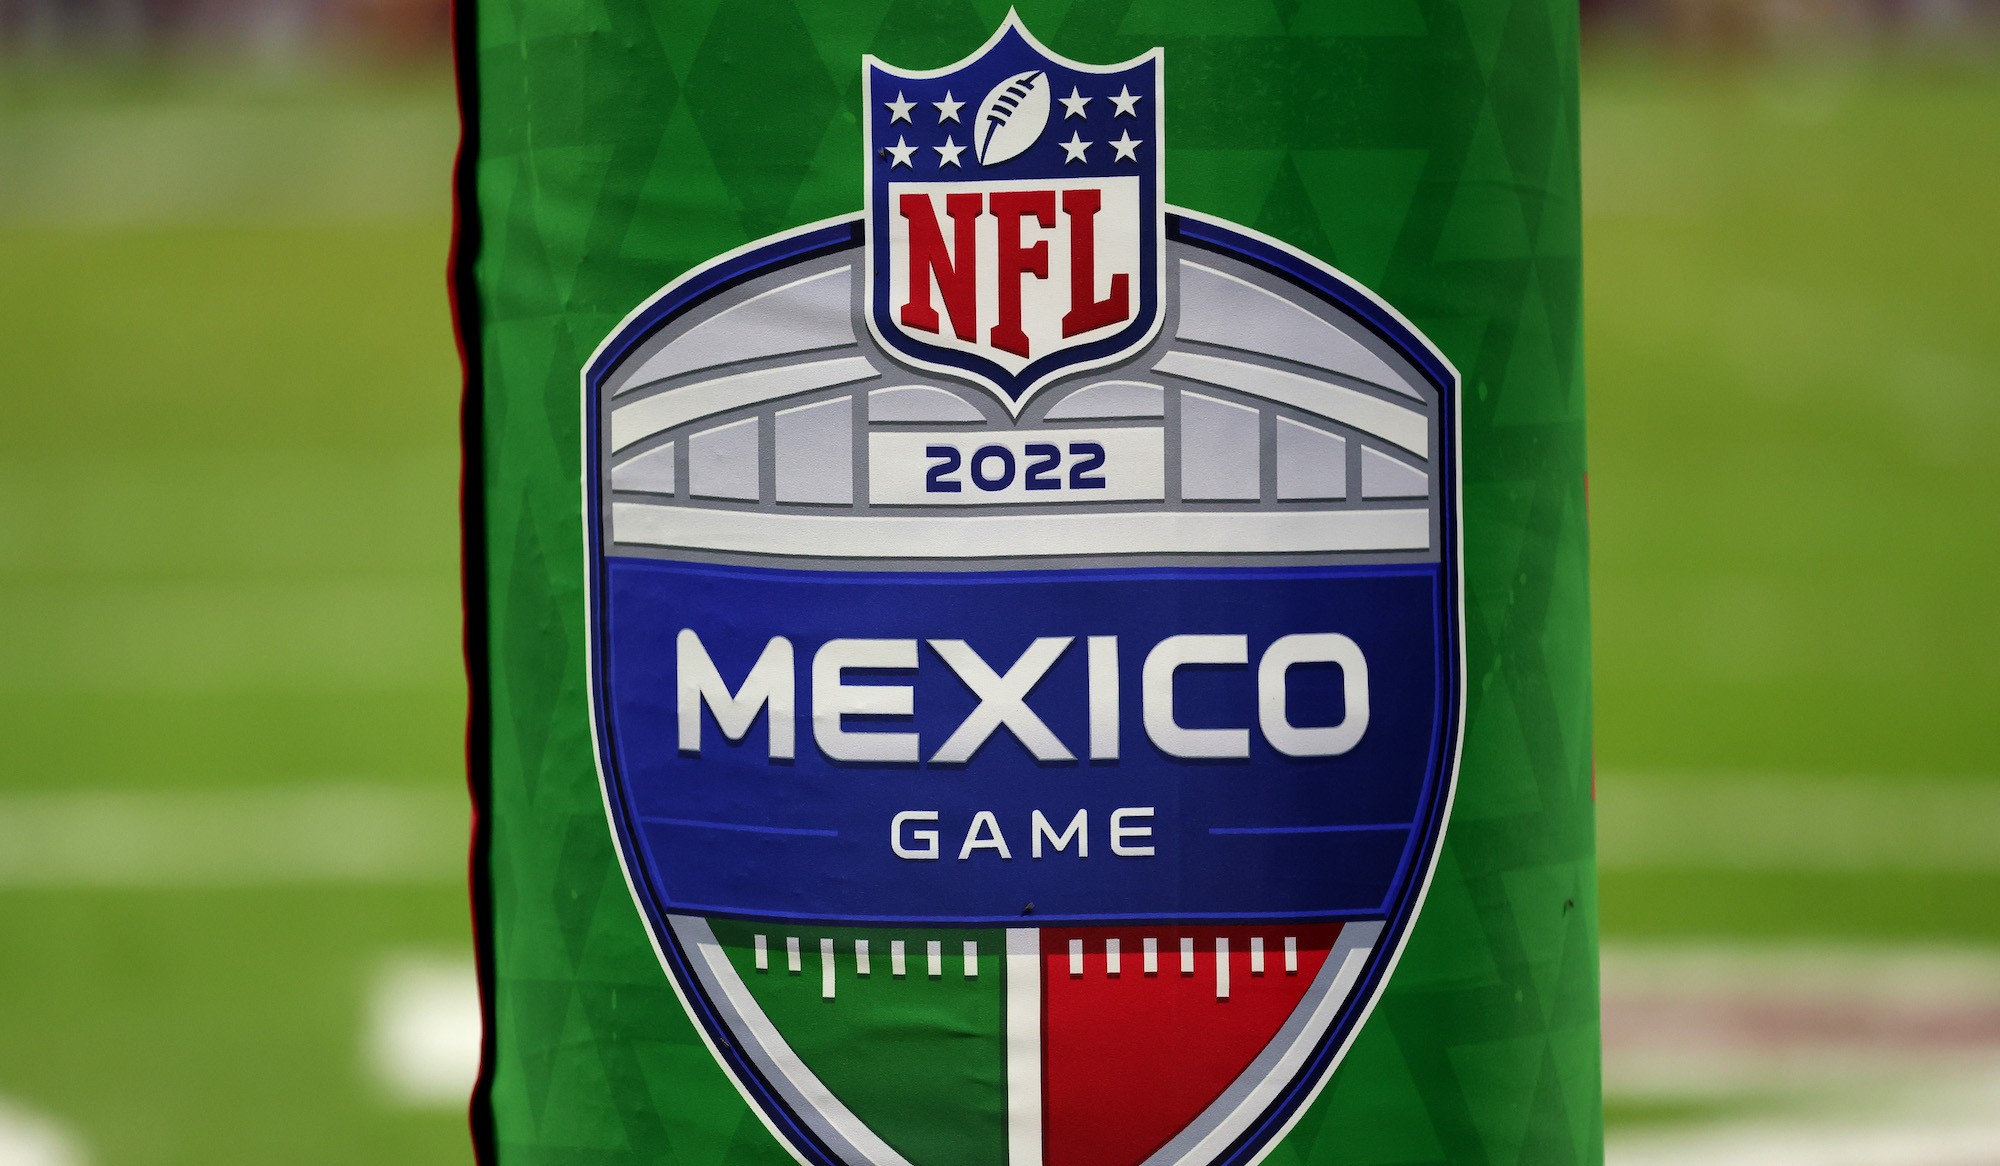 REPORT: Arizona Cardinals Fired Coach After 'Incident In Mexico'